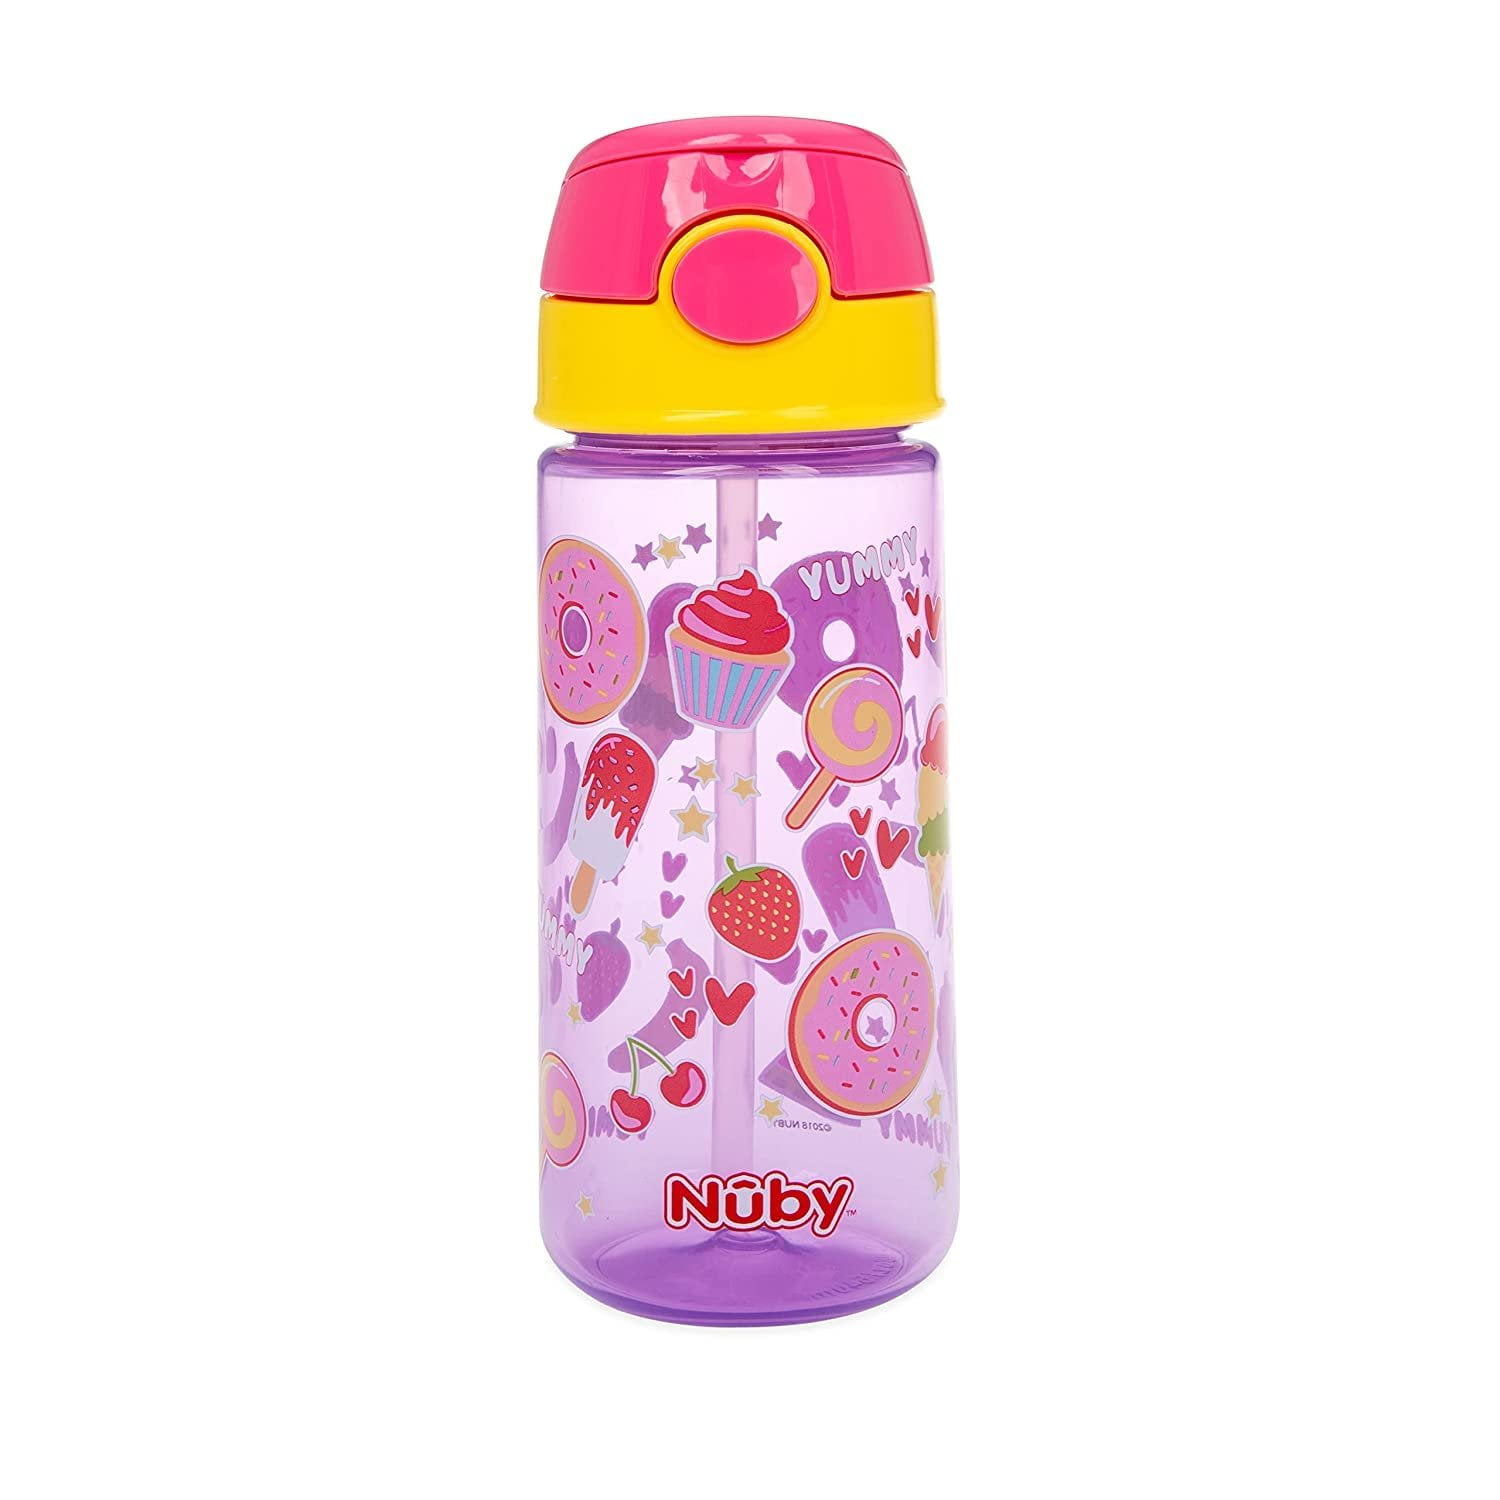 Nuby 2367457 18 oz Flip-It Printed Cups with Push Button Cap - 18 Month Plus - Pack of 2 - Case of 12